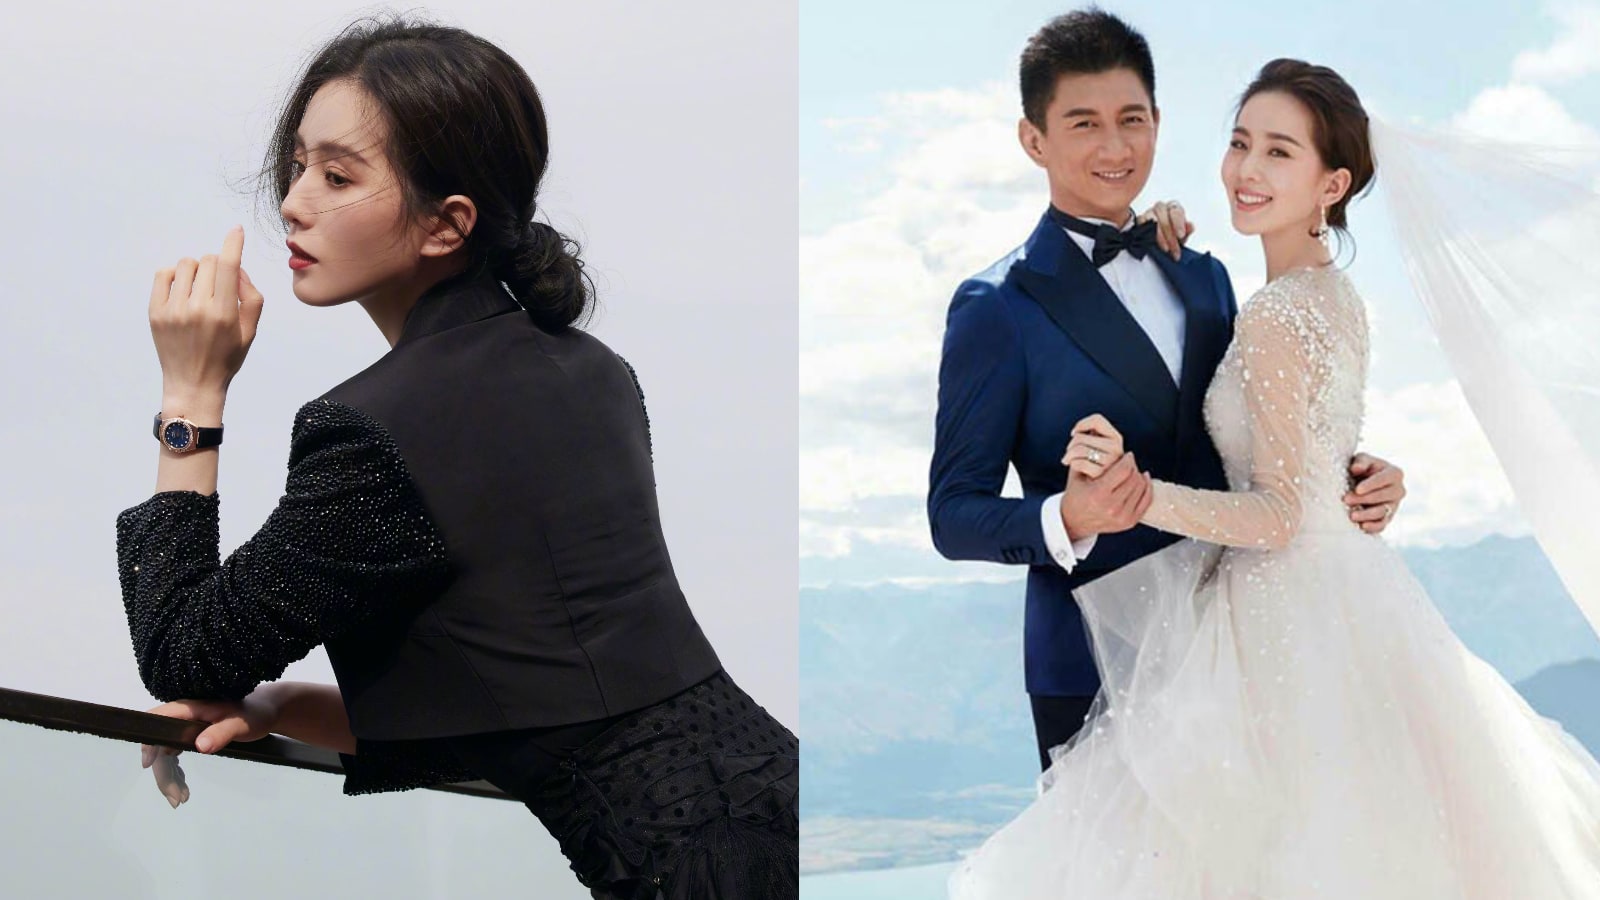   Nicky Wu & Liu Shishi’s Marriage Under Scrutiny Again After The Actress Posts Pics Without Her Wedding Ring